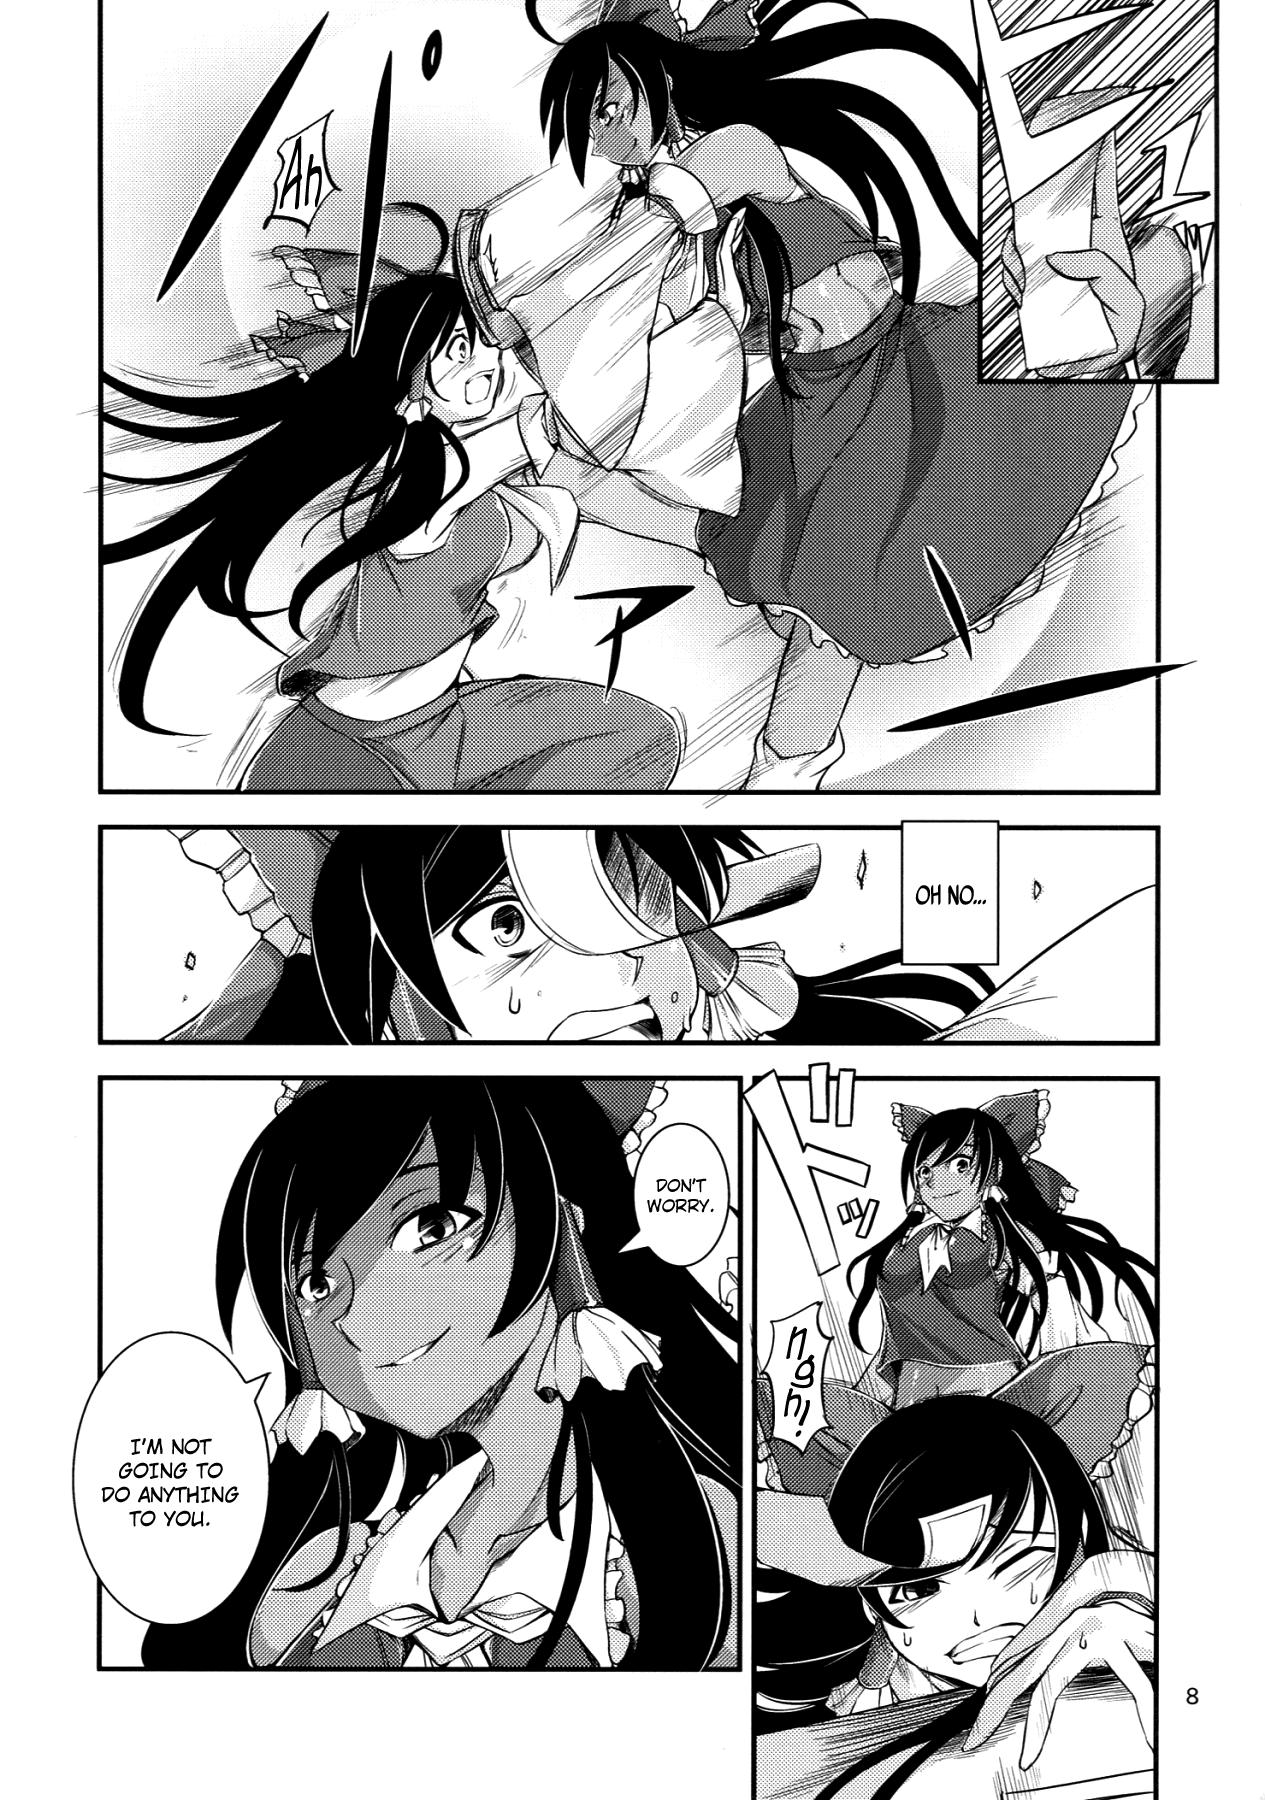 The Incident of the Black Shrine Maiden 6